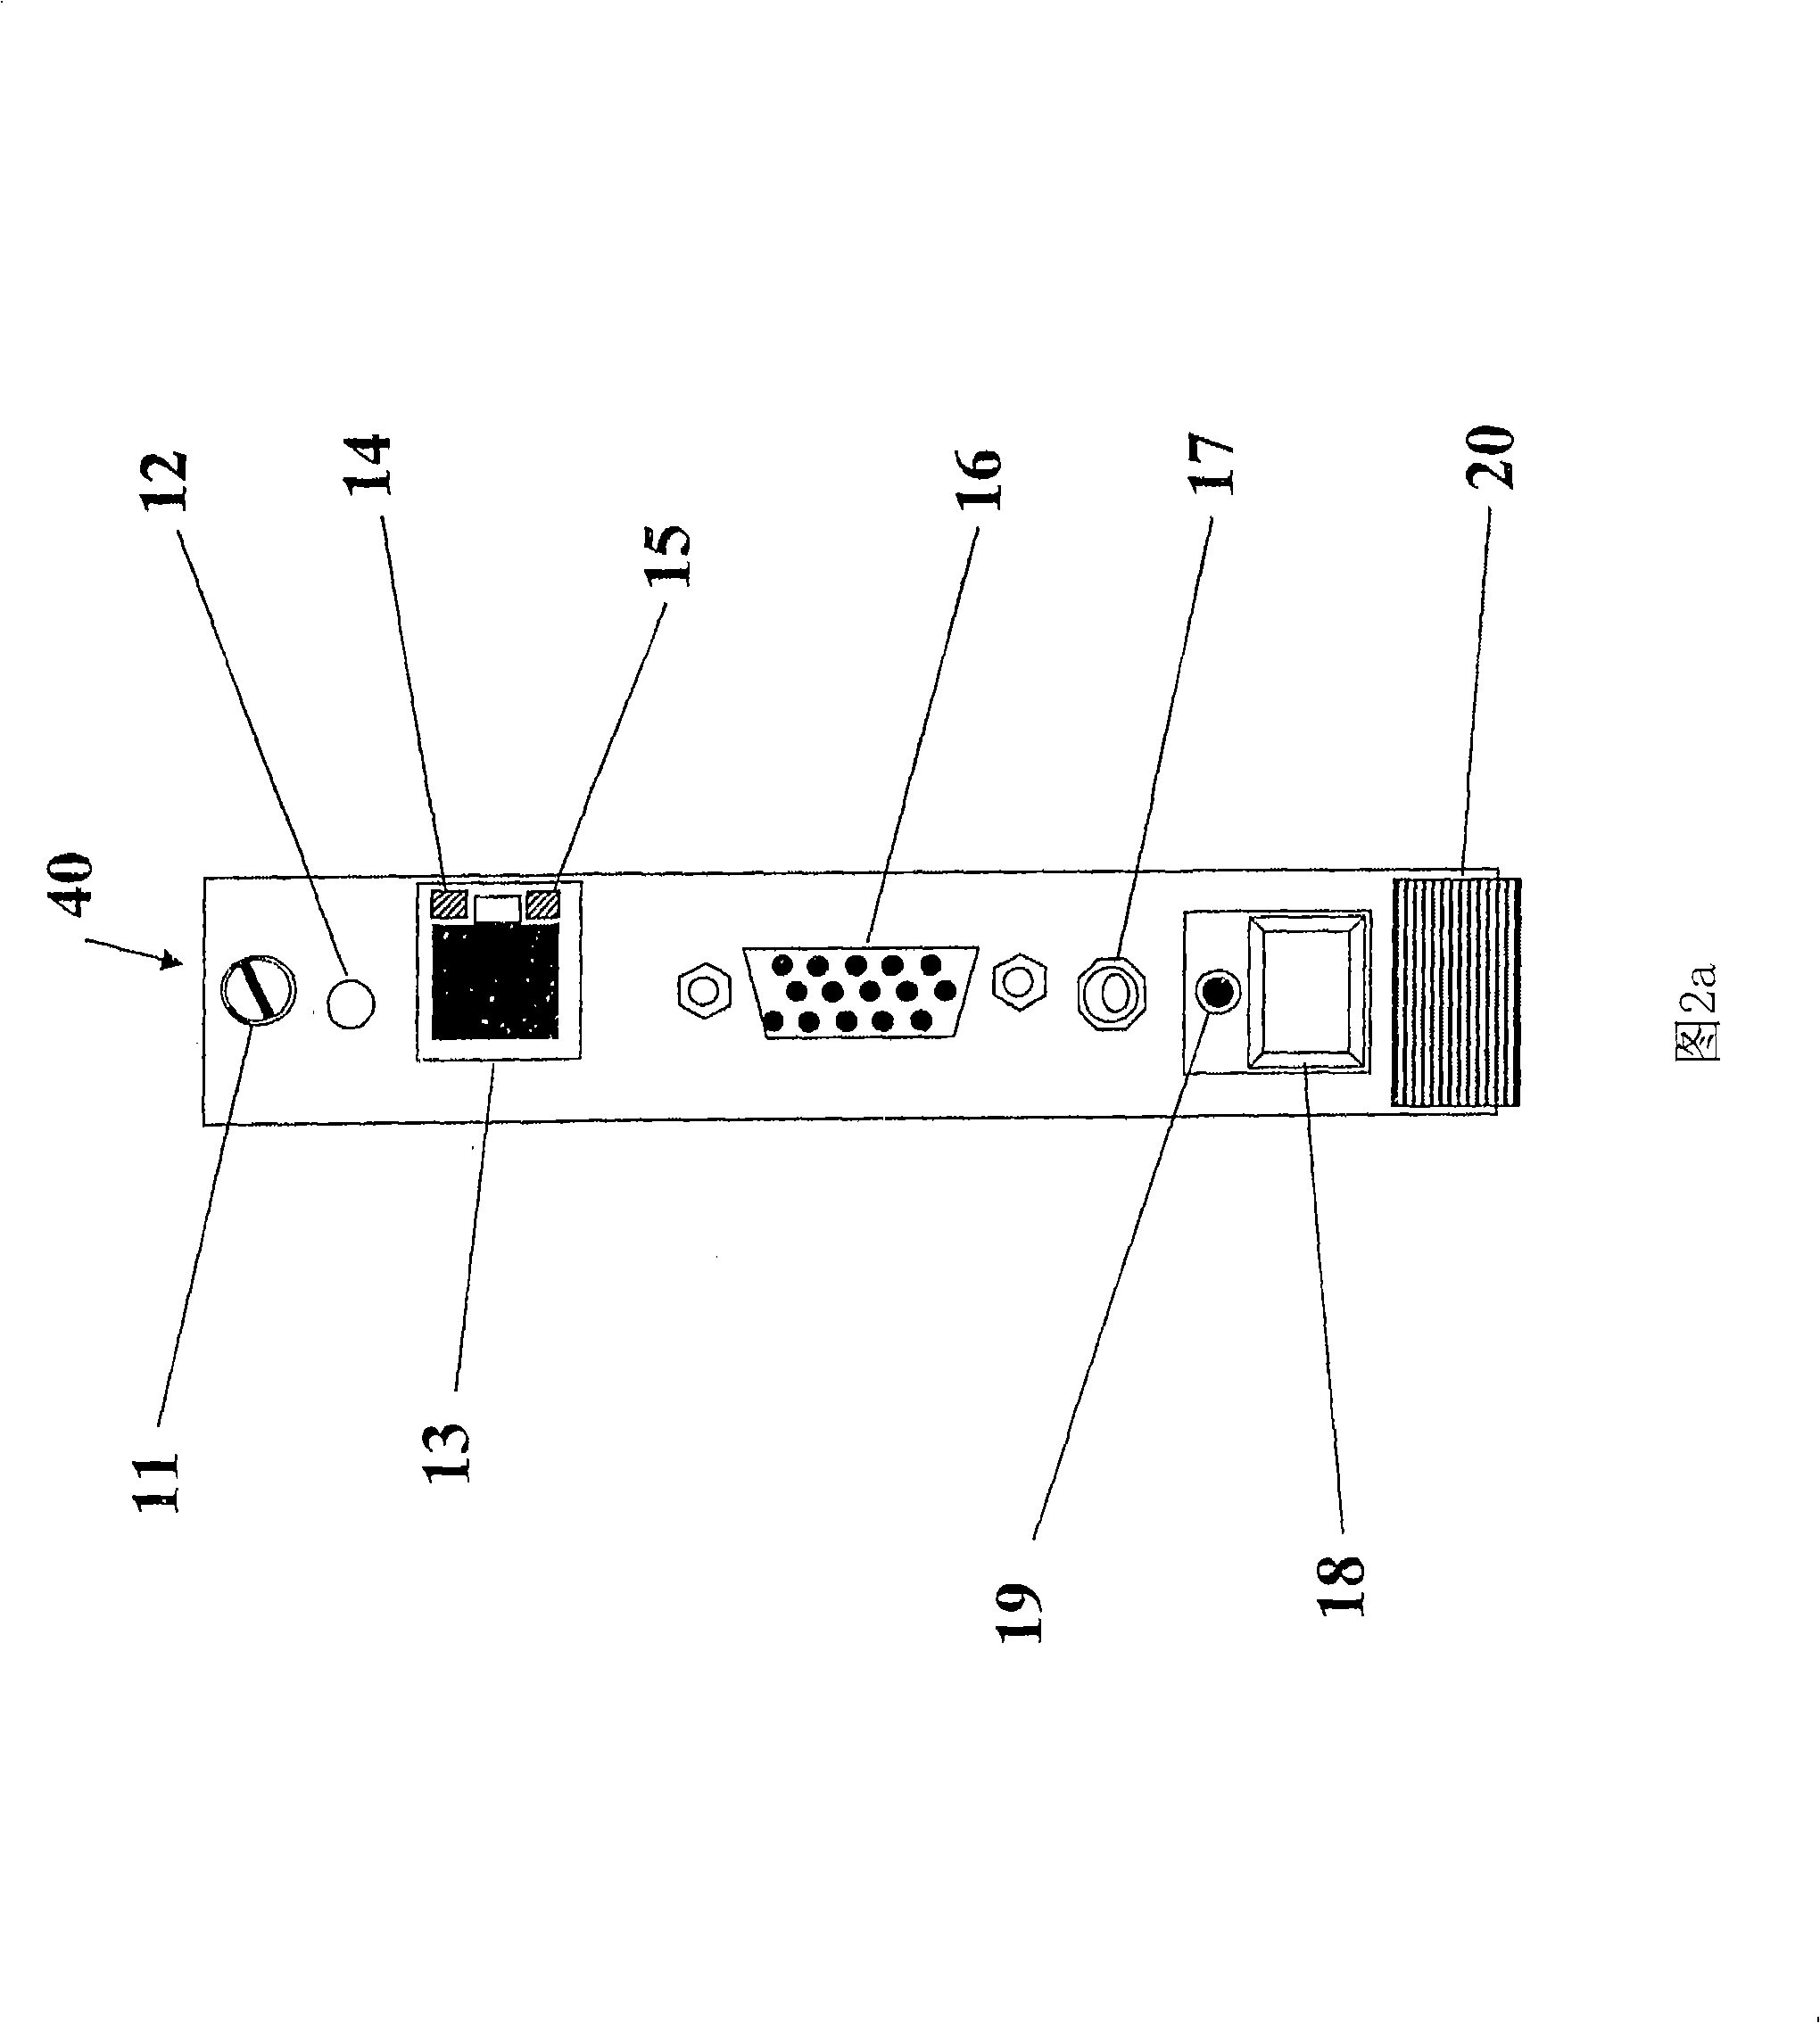 Apparatus, method and system of thin client blade modularity